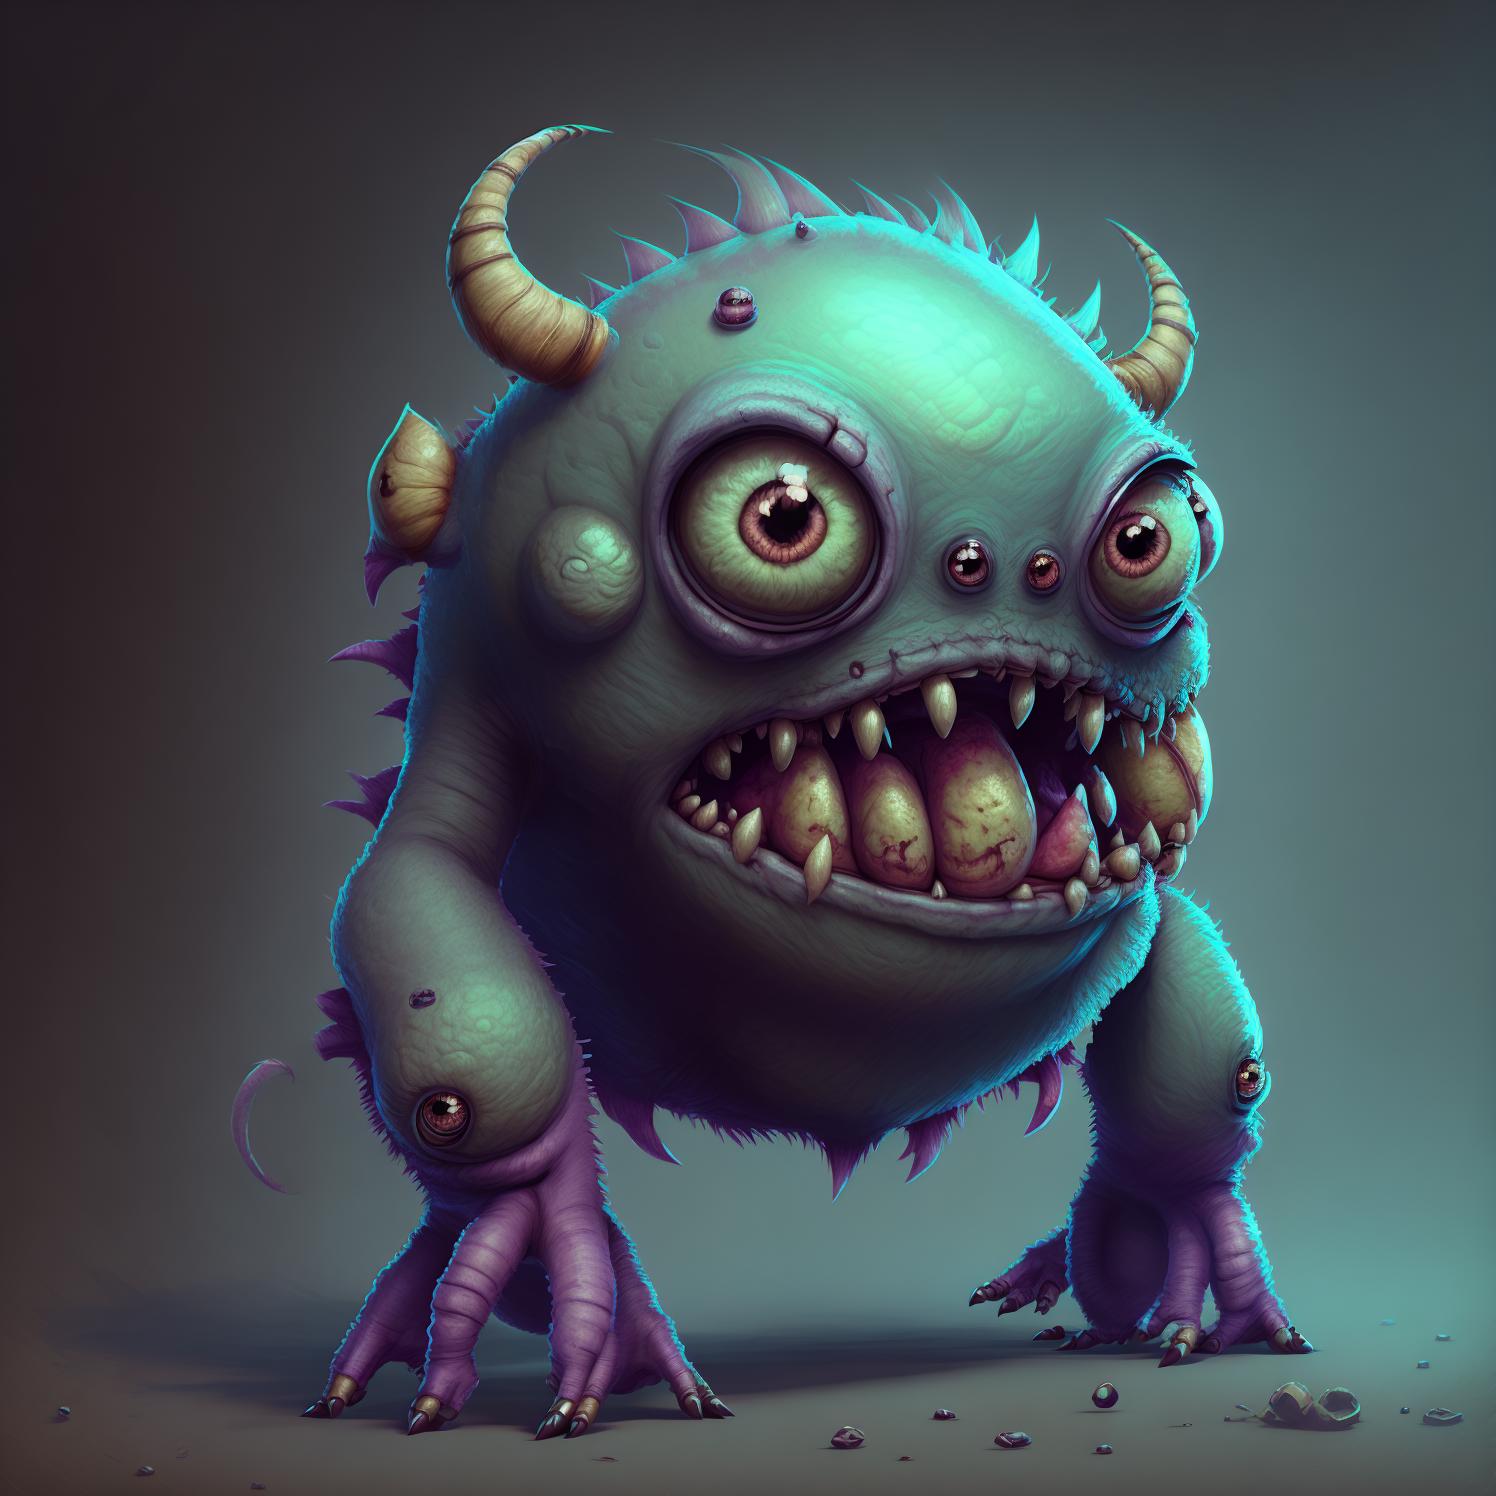 Funny creatures image by smereces_ai